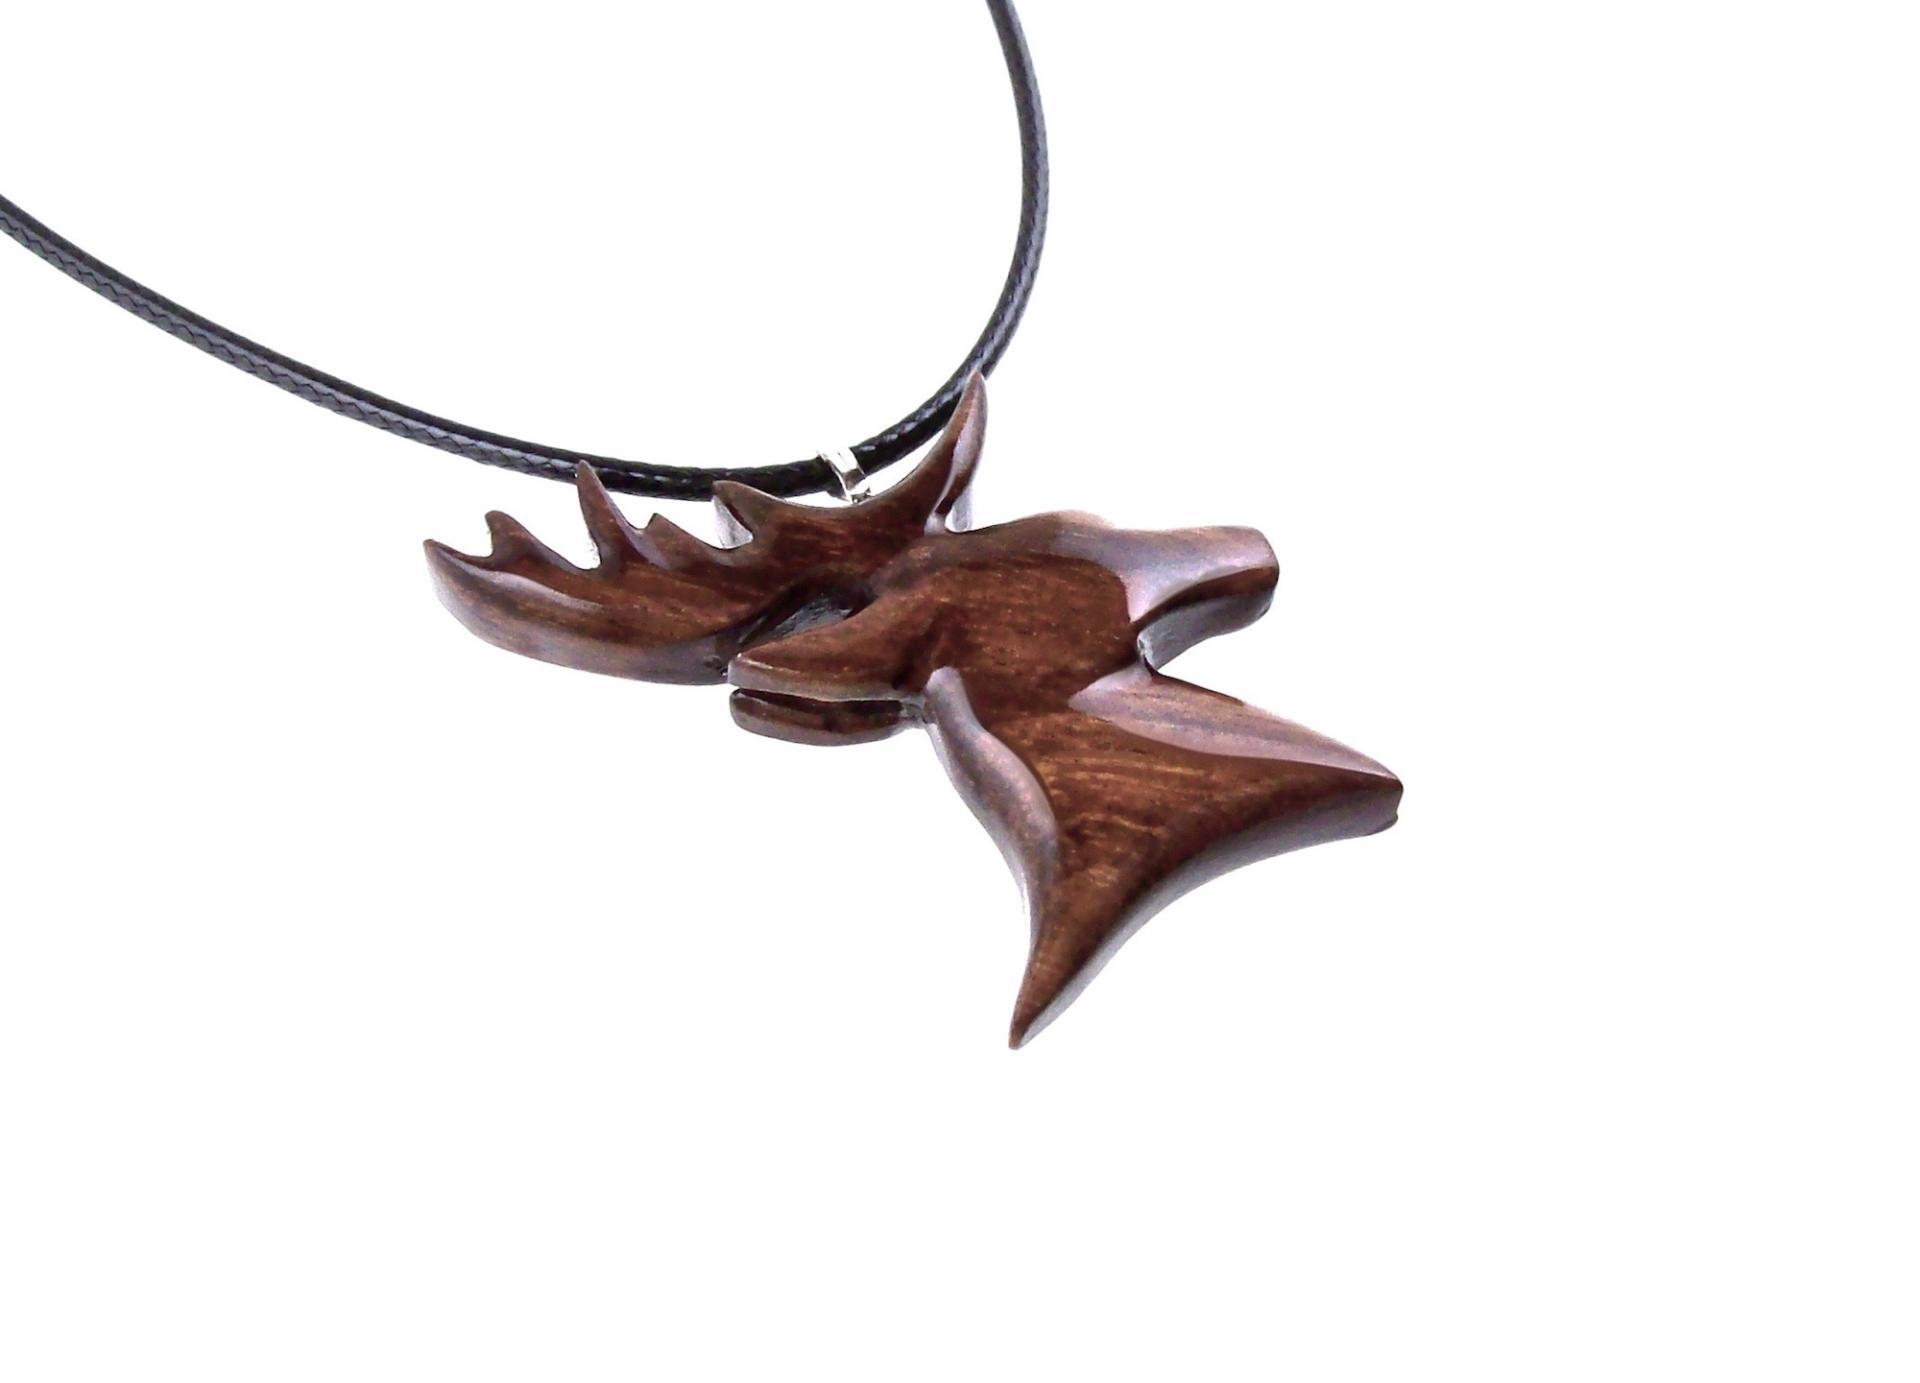 Deer Pendant, Hand Carved Wooden Stag Necklace, Buck Head Necklace, Spirit Animal Totem Gift for Him, Woodland Mens Jewelry